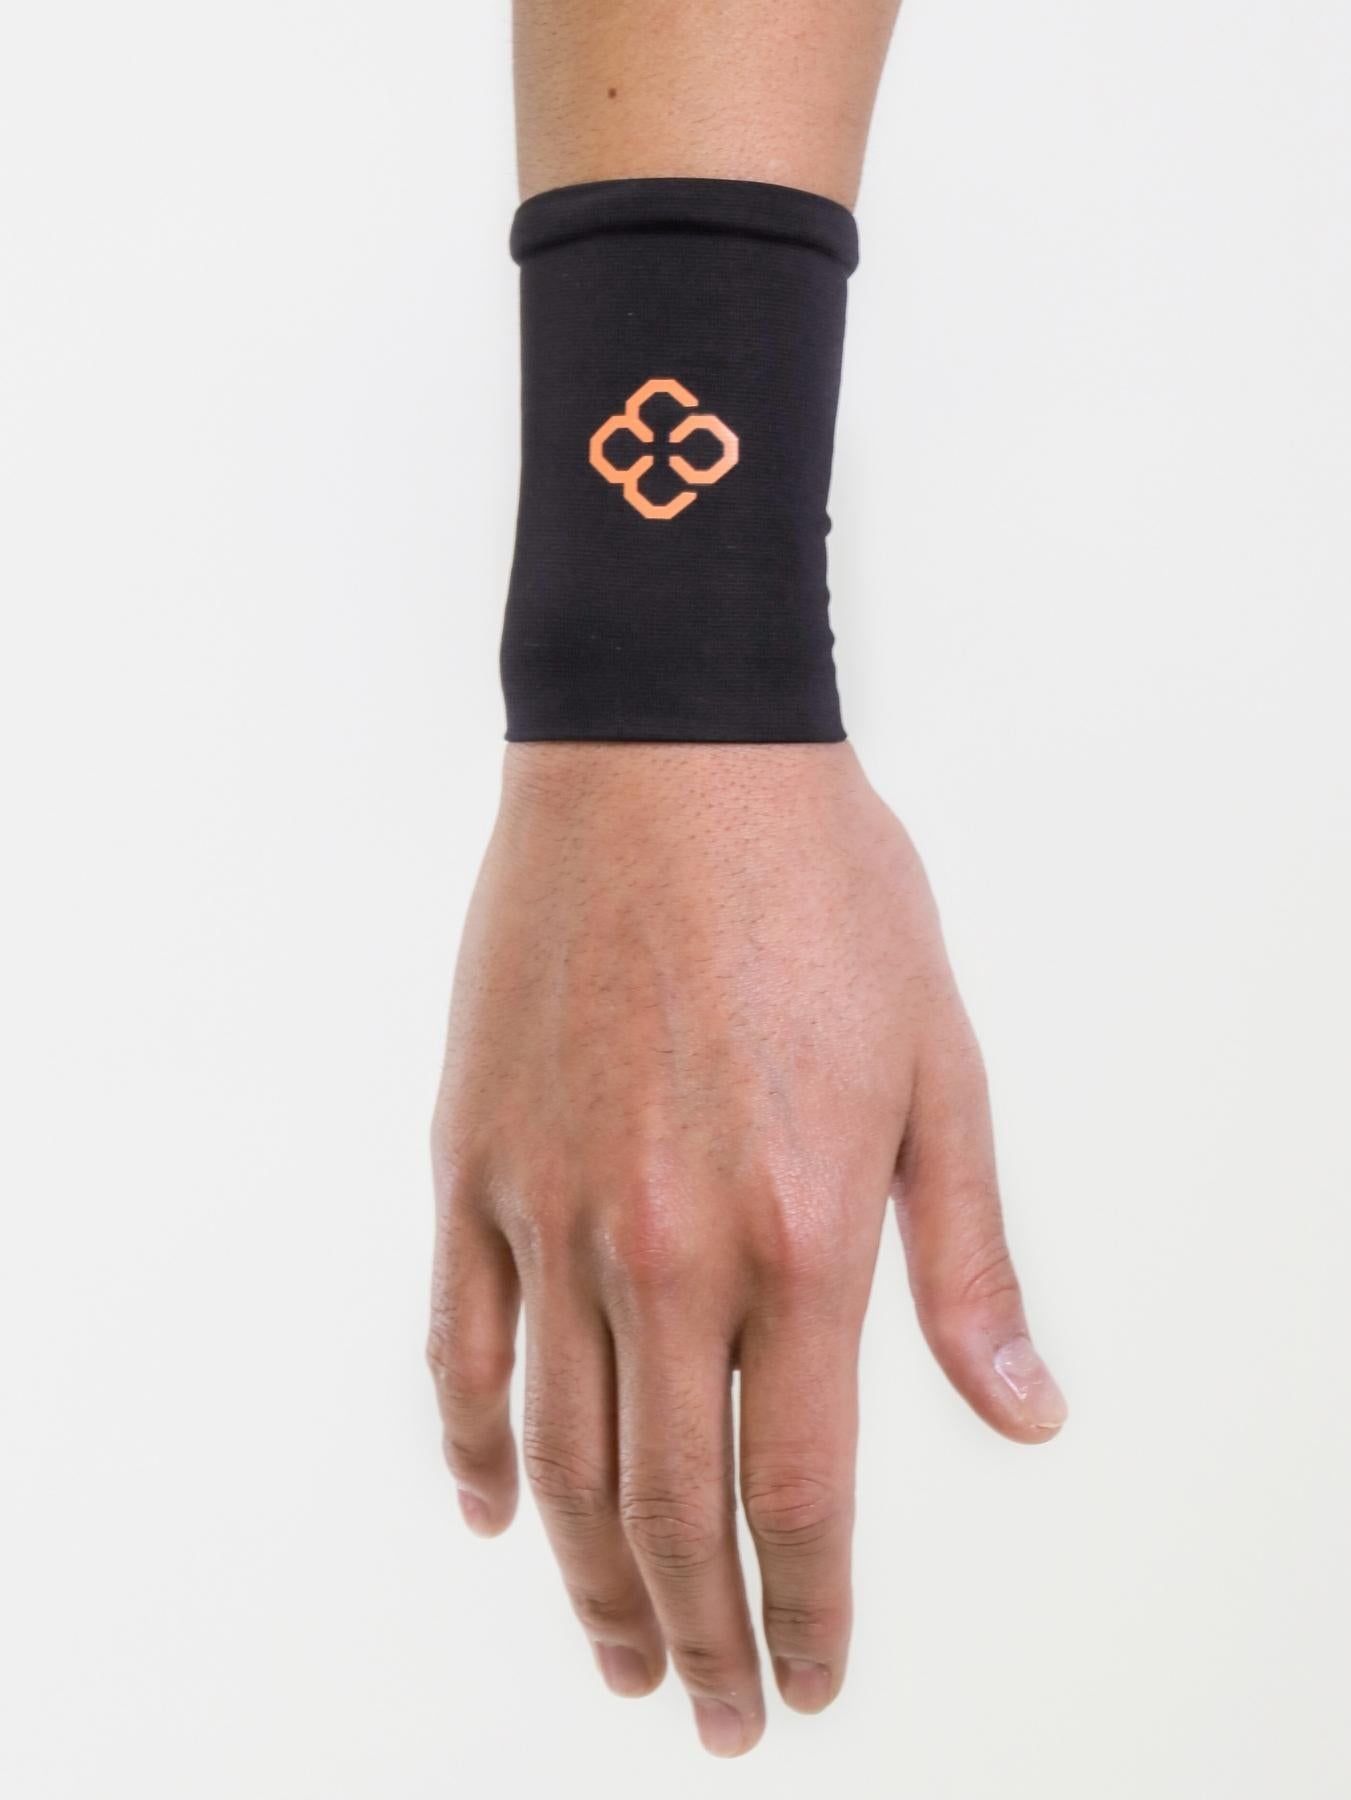 COPPER Compression Wrist/Hand Sleeve – KBM Outdoors